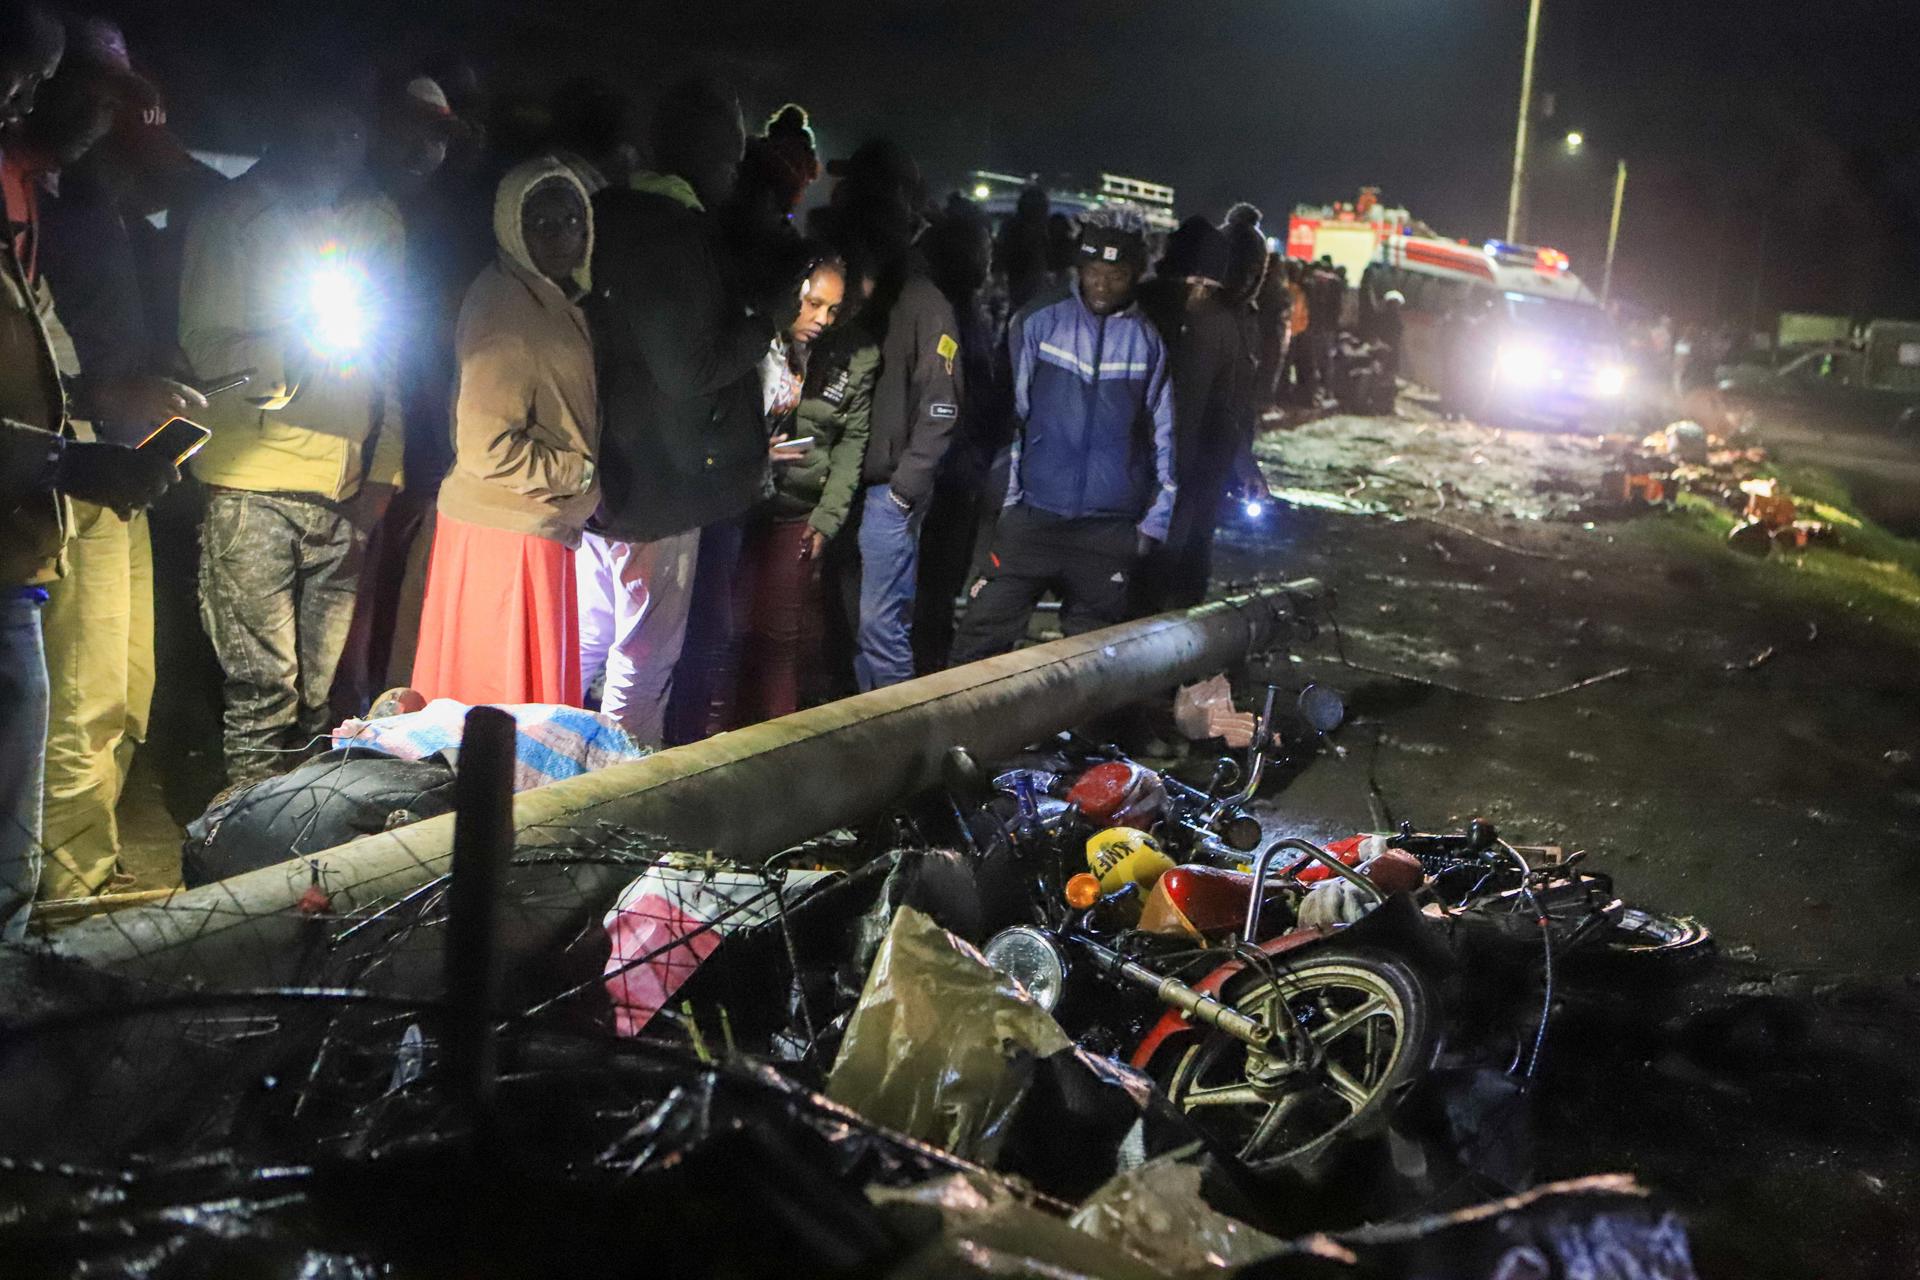 People mill around and search through the aftermath of a traffic accident in Londiani Junction area along the Kericho-Nakuru highway in Kericho County, Kenya's Rift Valley region, Kenya, 01 July 2023. EFE/EPA/STR